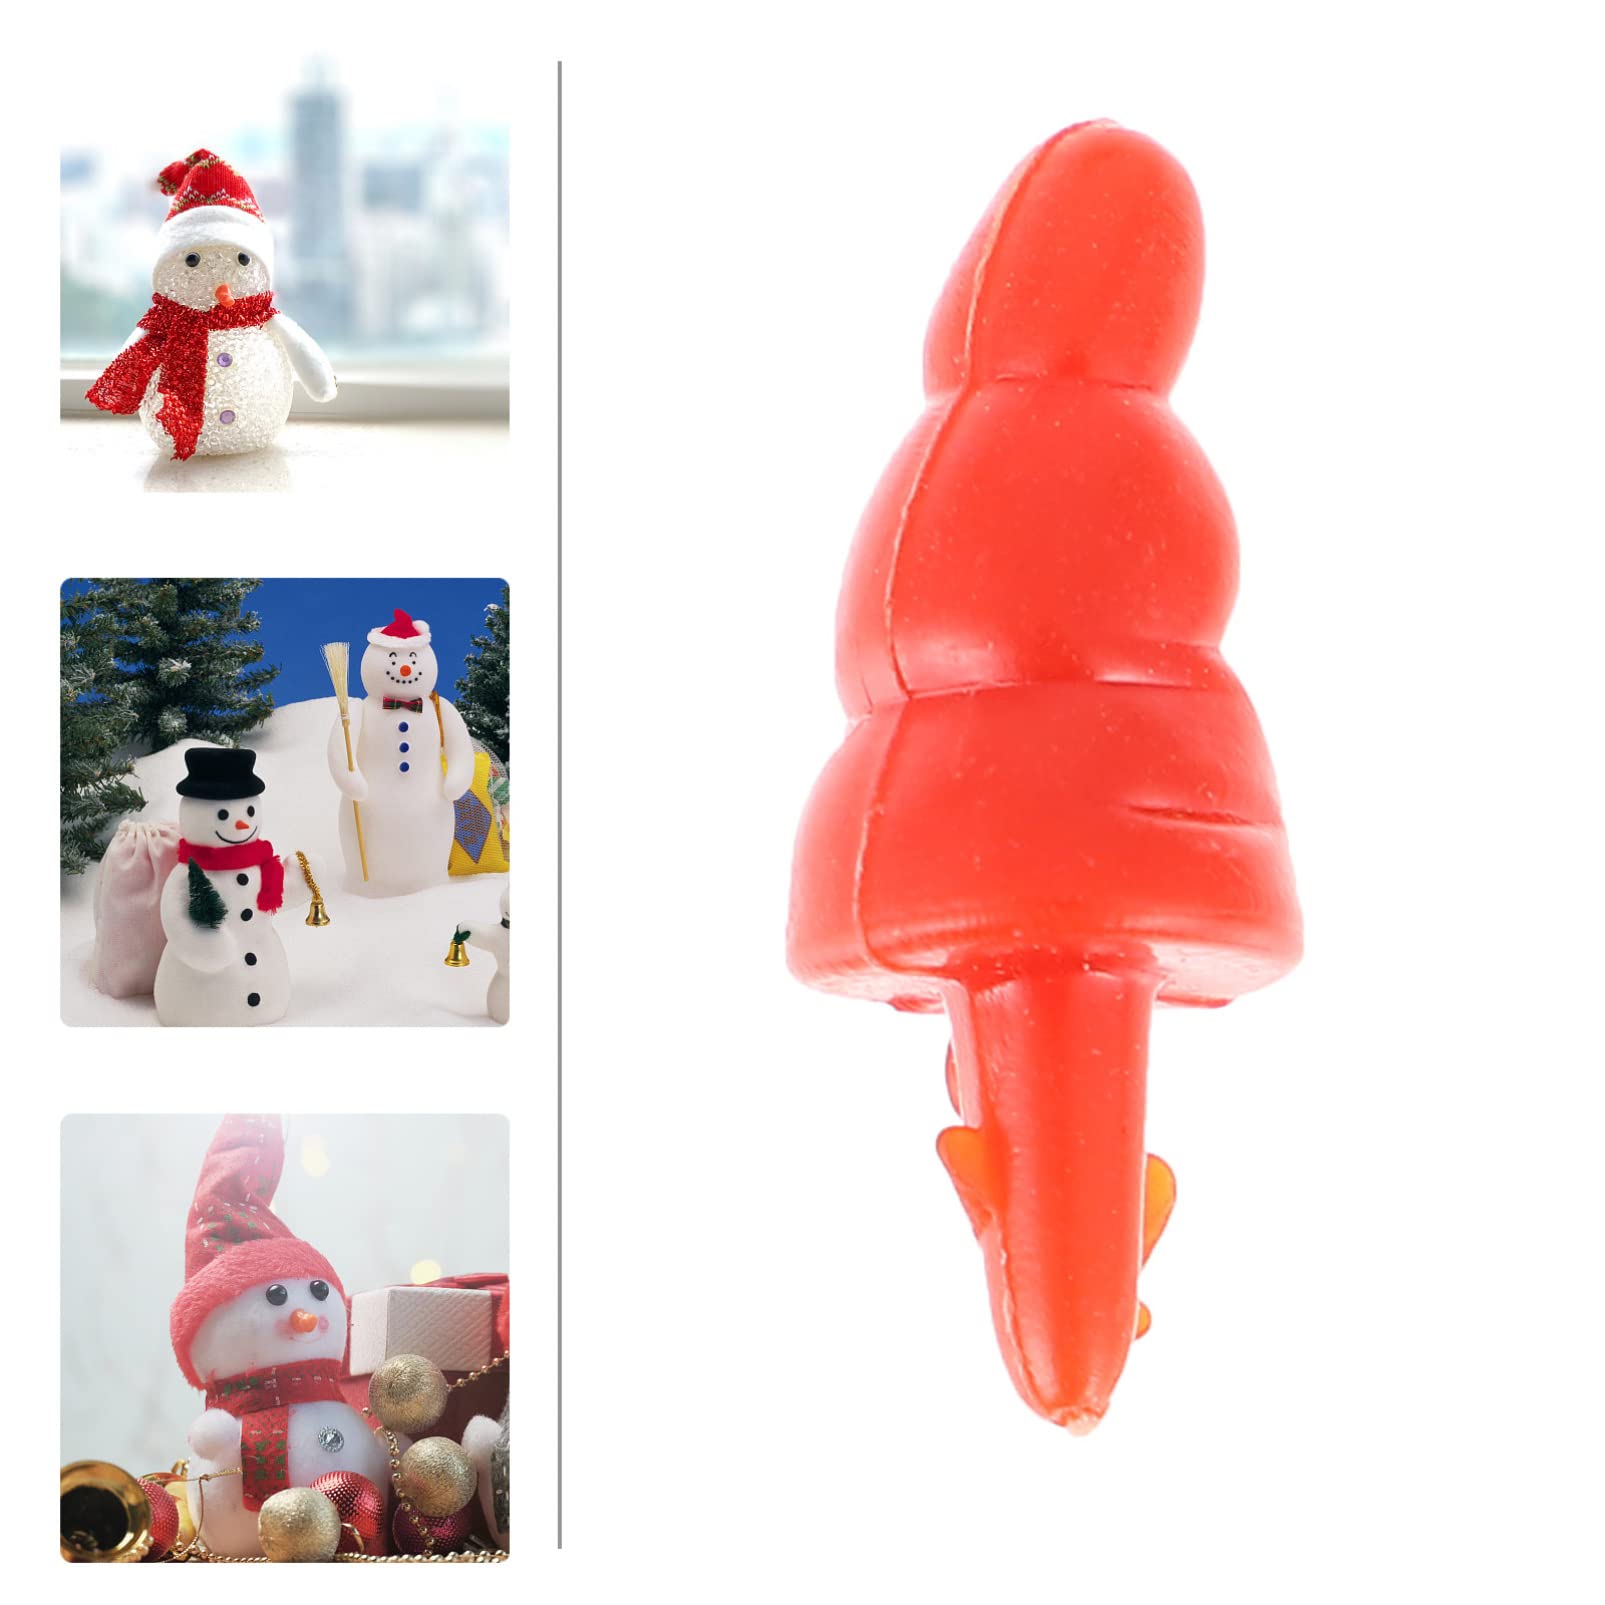 BESTOYARD 100pcs Snowman Nose Accessory Plastic playes red Accessories Dolls for Dollhouse Carrot noses for Crafts